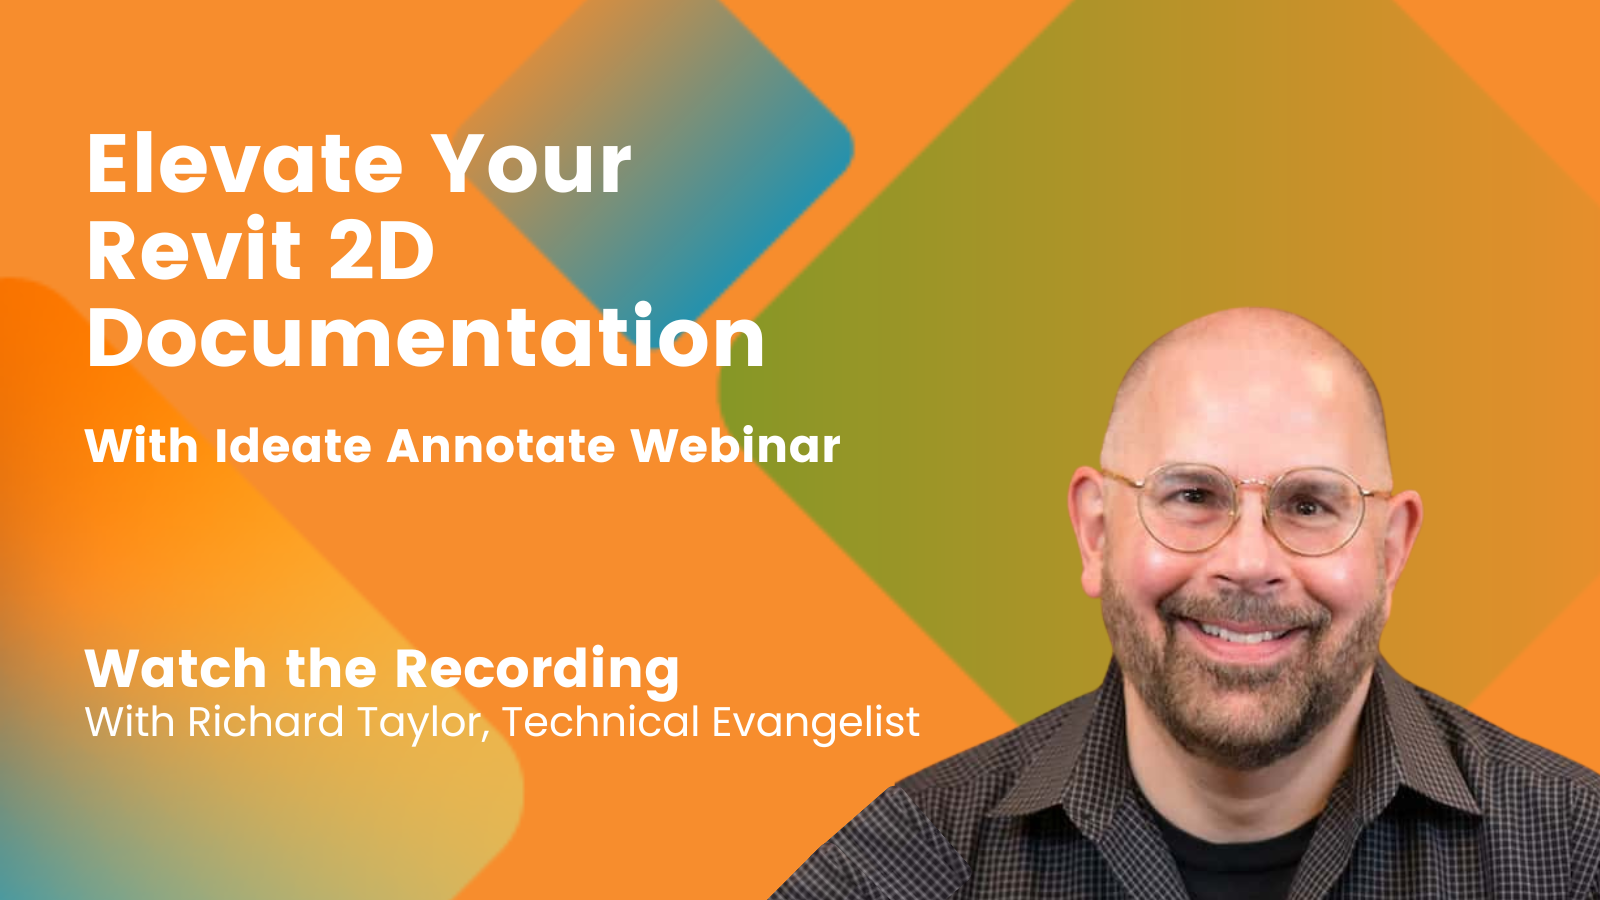 Webinar Recording – Elevate Revit Projects with Ideate Annotate